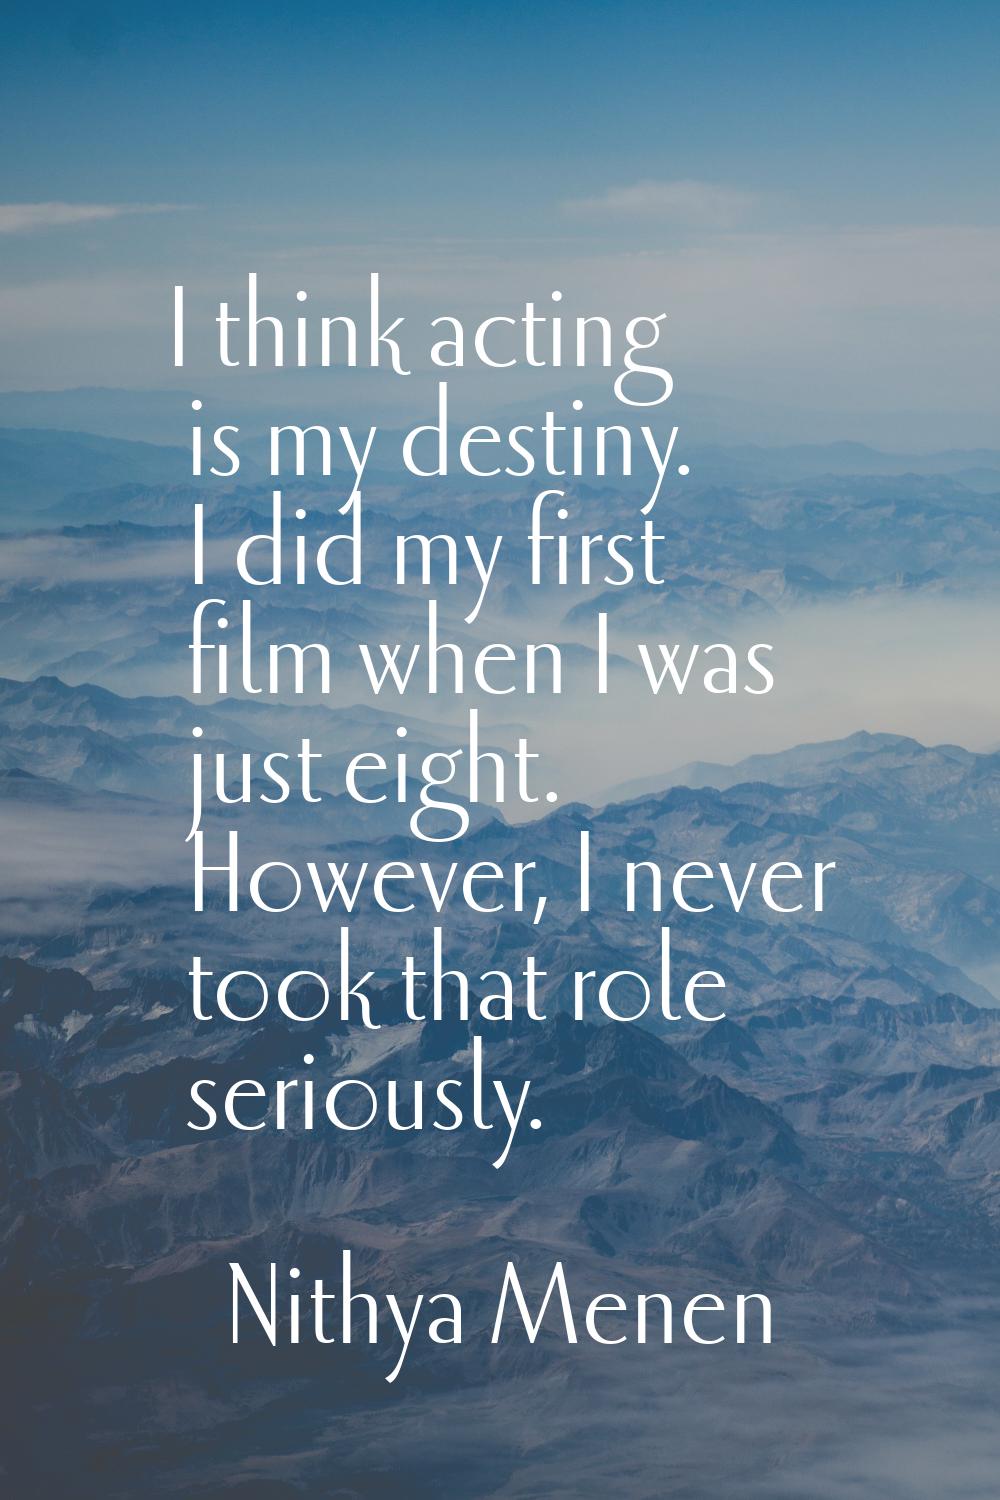 I think acting is my destiny. I did my first film when I was just eight. However, I never took that